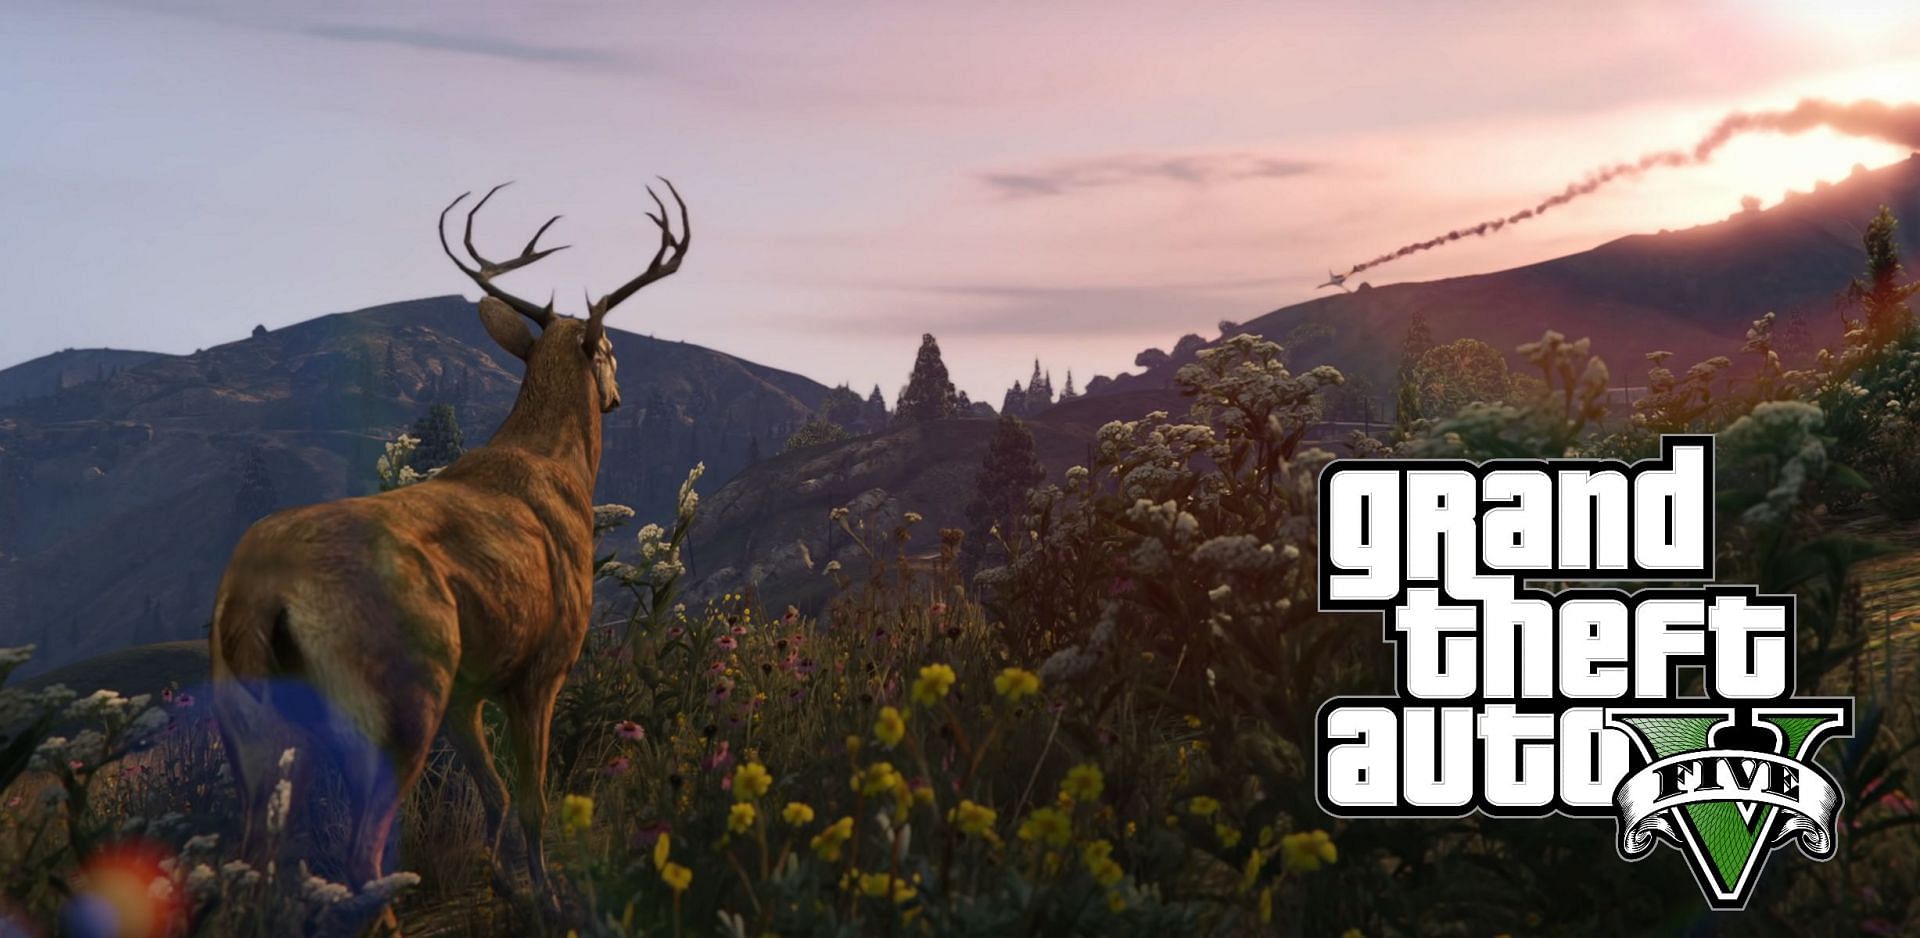 March 2022 is still the expected release date (Image via Rockstar Games)